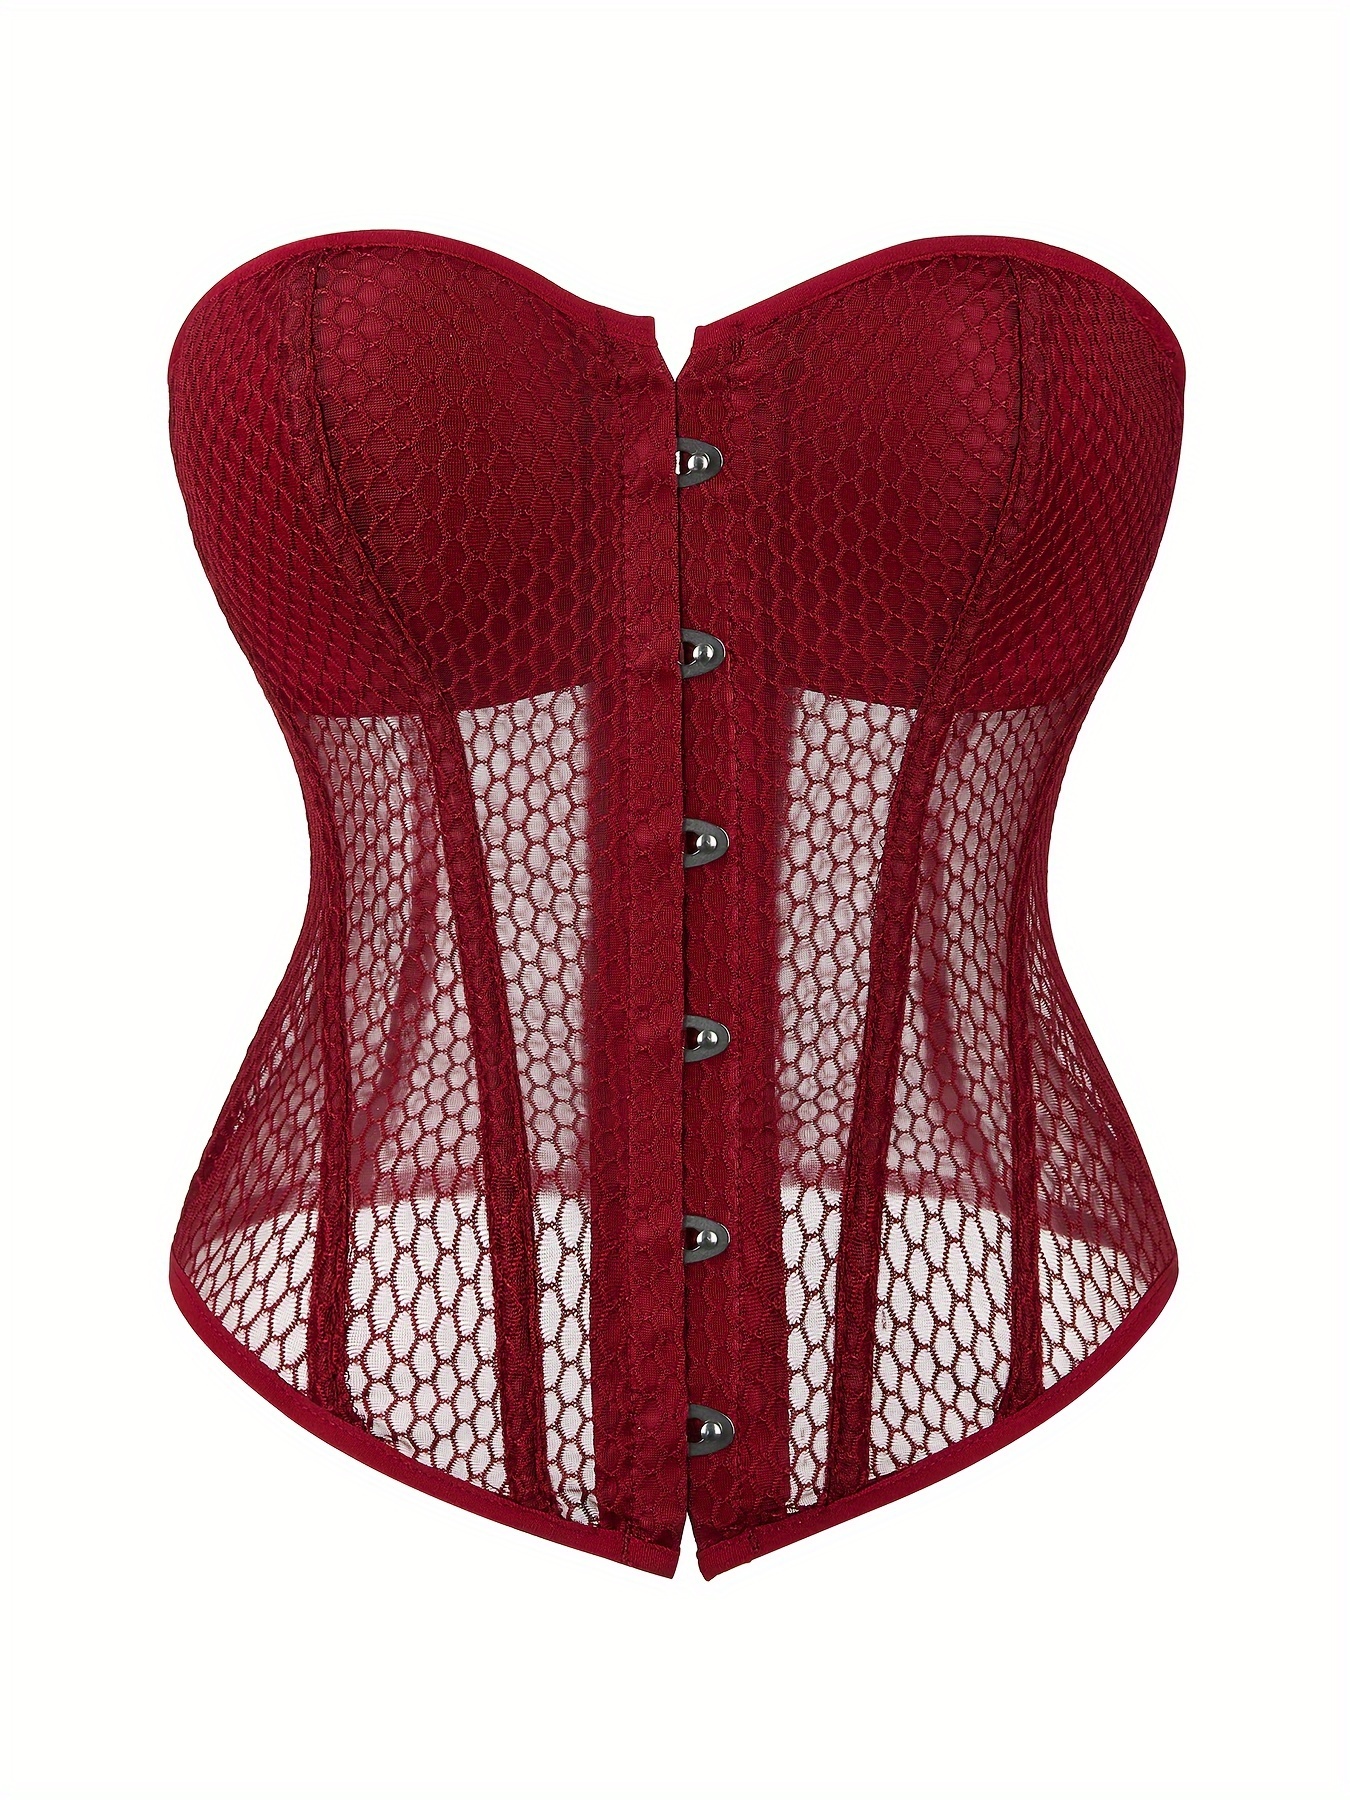 red corset top by the brand vaacodor. features black